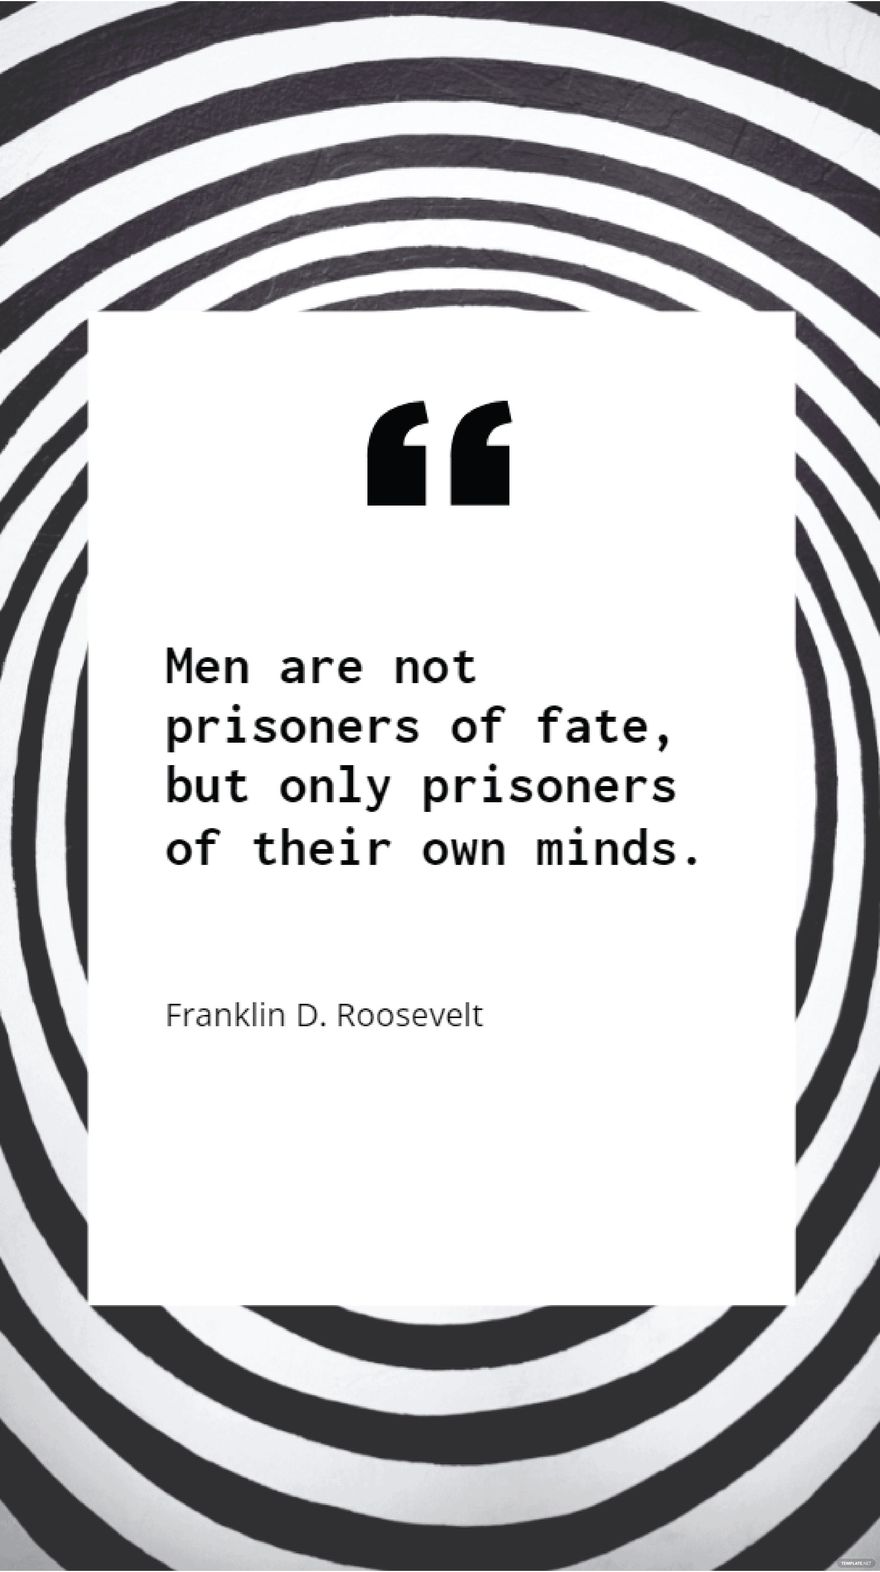 Franklin D. Roosevelt - Men are not prisoners of fate, but only prisoners of their own minds.